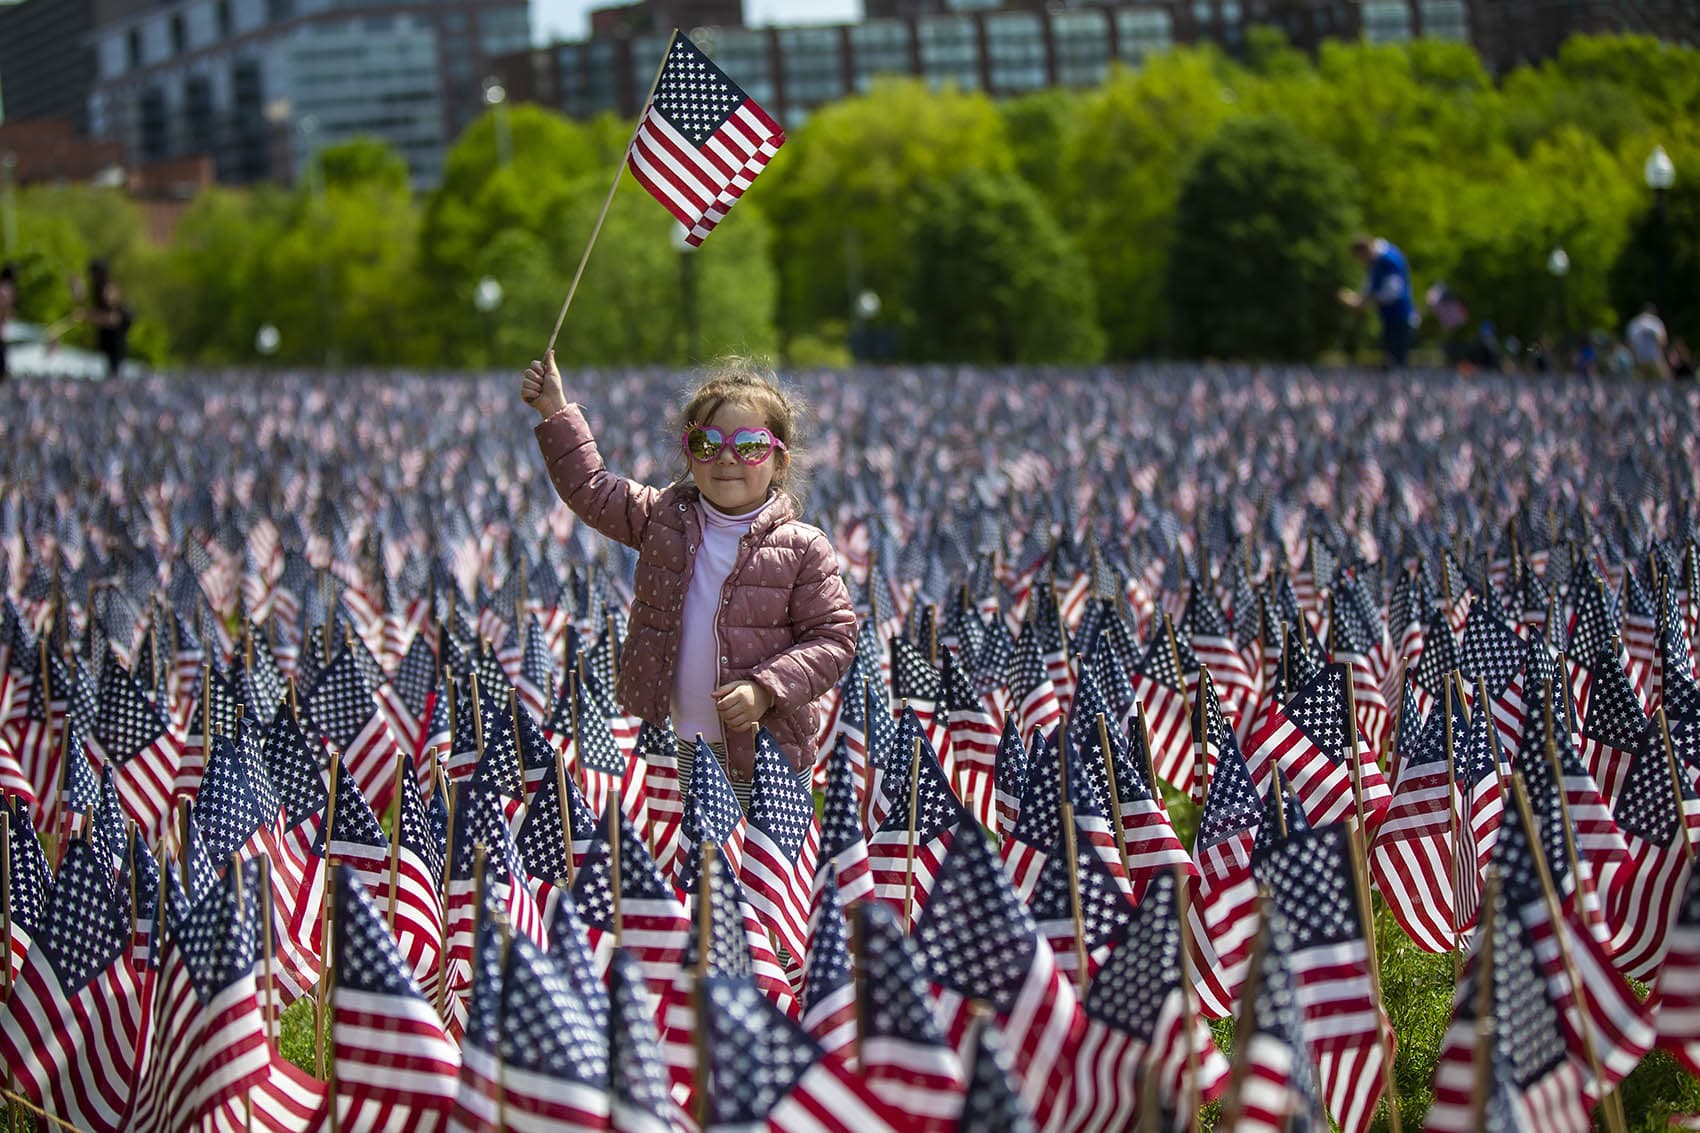 Three-and-a-half-year-old Veronica Ianivska holds up an American flag as her mother takes a picture of her in the sea of flags in Boston Common during the Massachusetts Military Heroes flag planting event Wednesday. (Jesse Costa/WBUR)